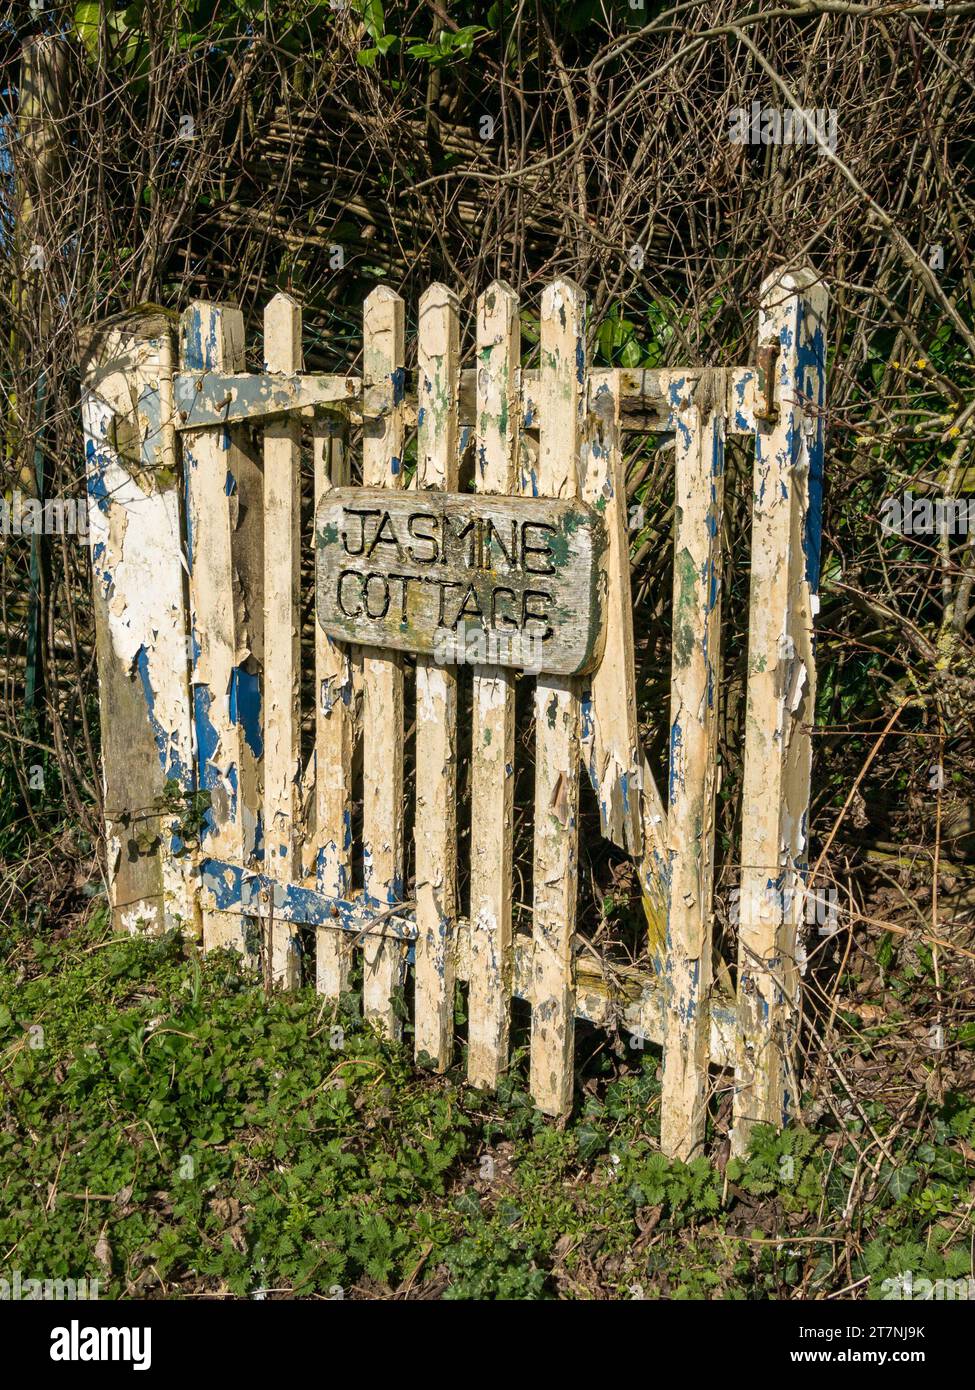 Old distressed wooden garden gate for "Jasmine Cottage" with peeling paint and rotting timber, Wyfordby, Leicestershire, England, UK Stock Photo